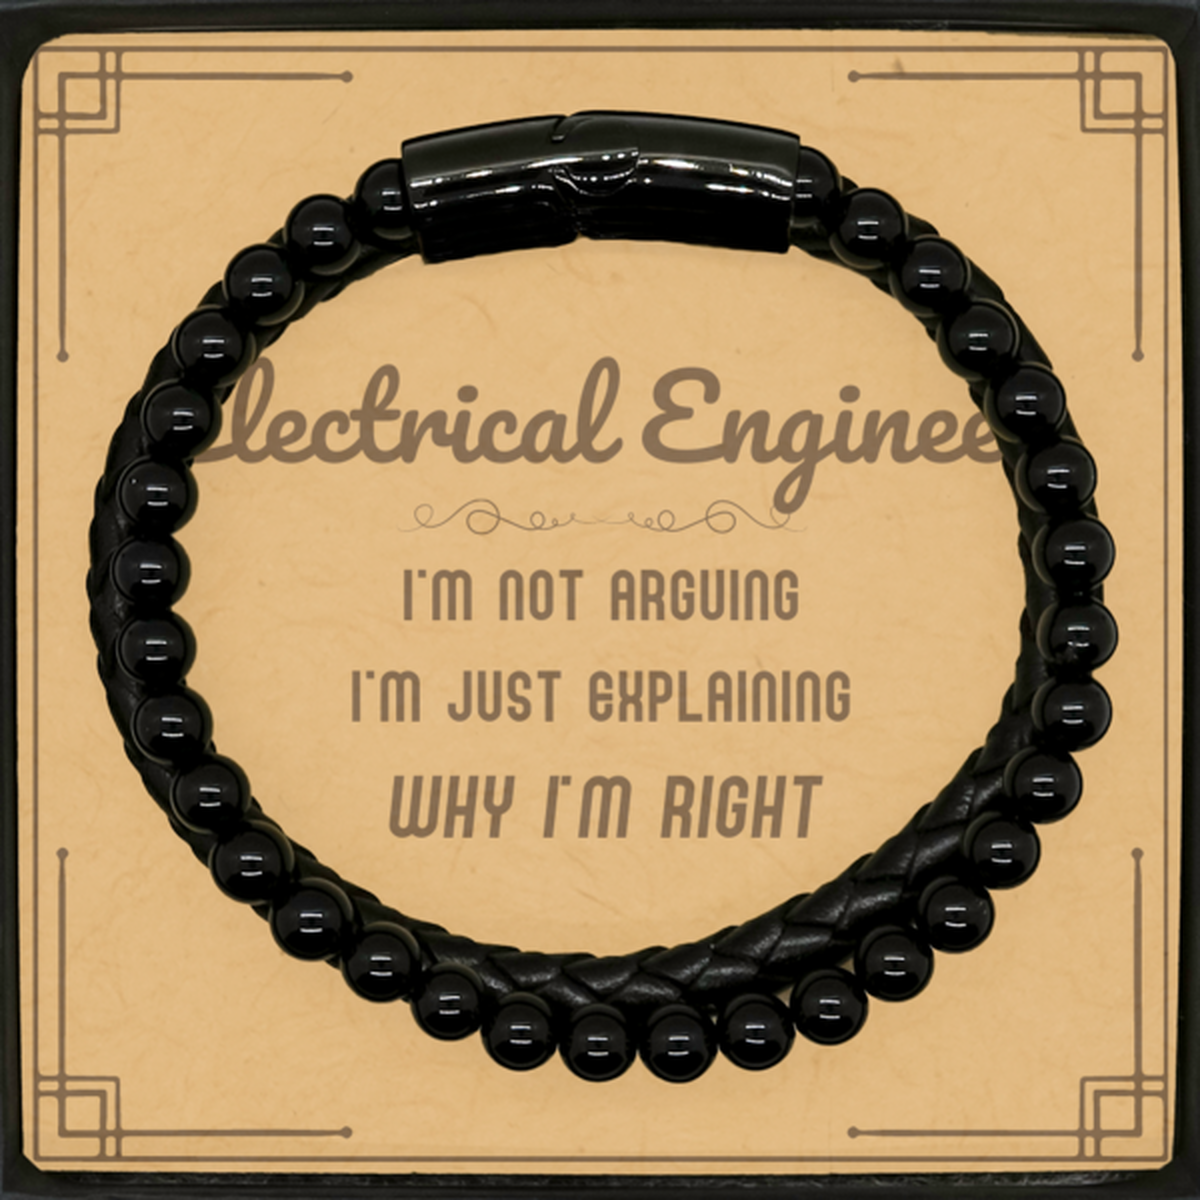 Electrical Engineer I'm not Arguing. I'm Just Explaining Why I'm RIGHT Stone Leather Bracelets, Funny Saying Quote Electrical Engineer Gifts For Electrical Engineer Message Card Graduation Birthday Christmas Gifts for Men Women Coworker